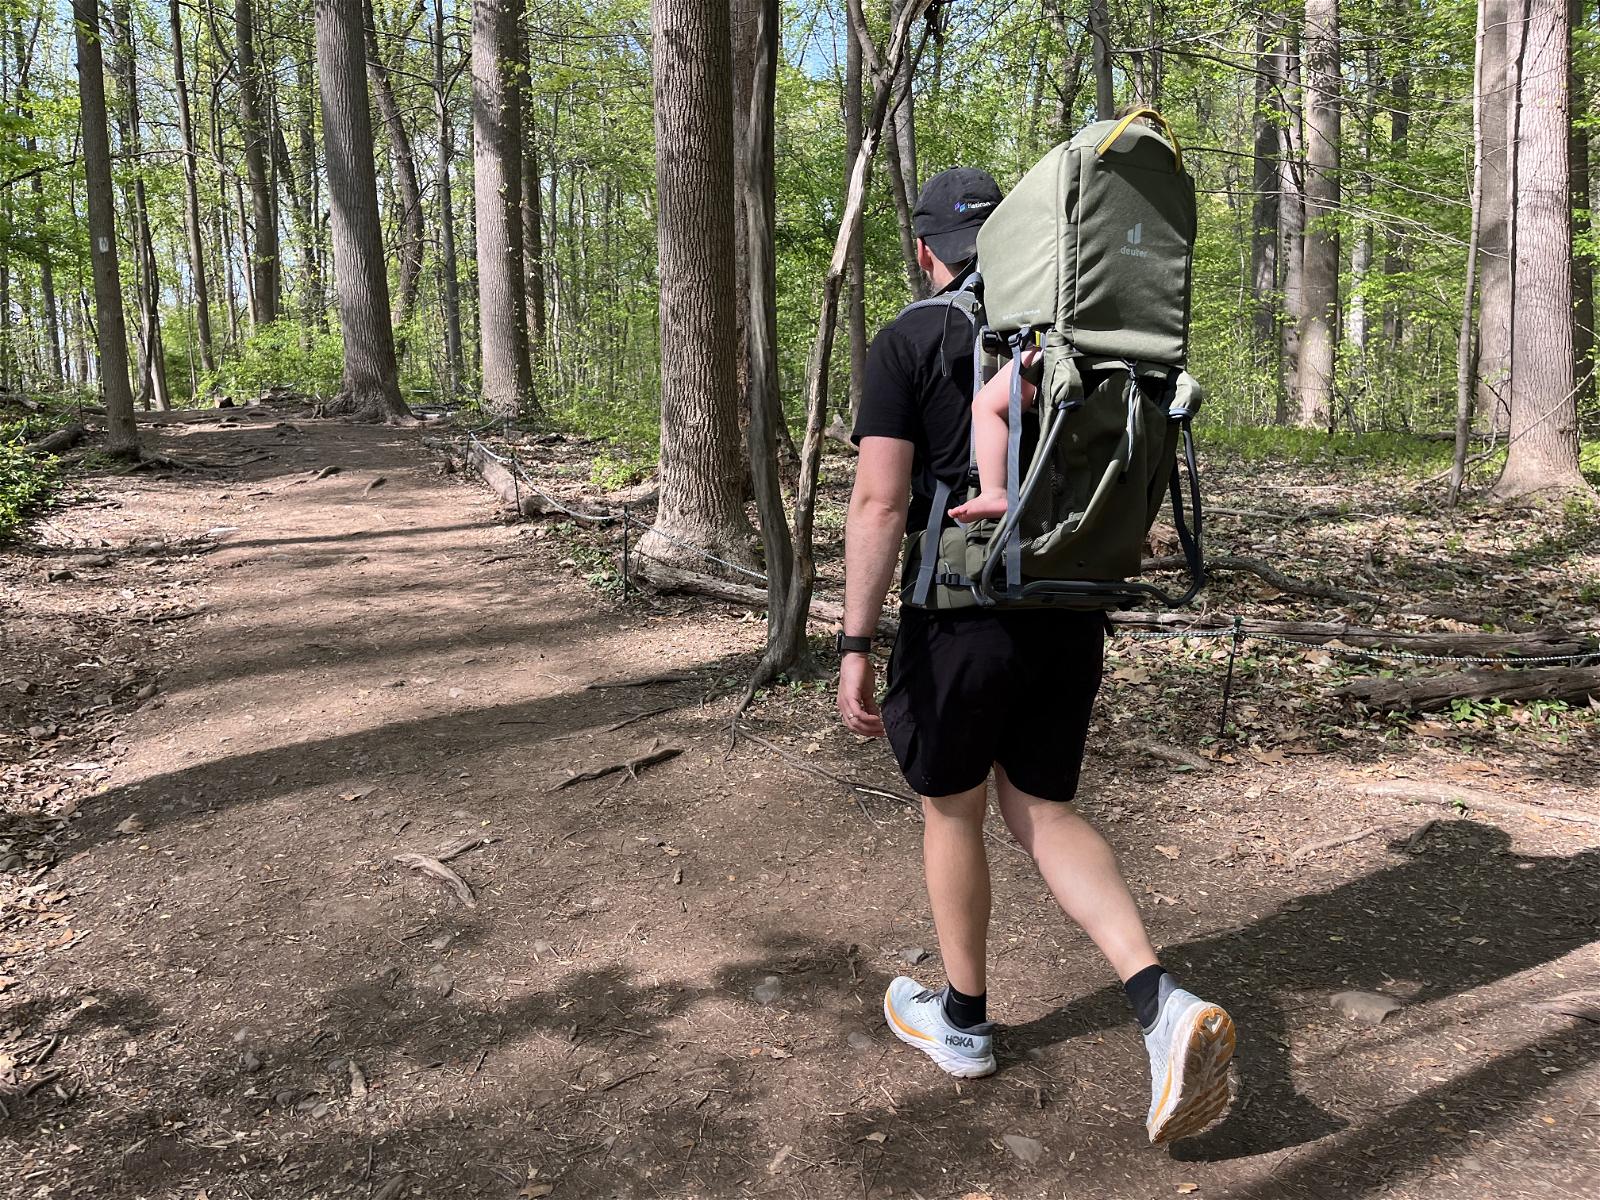 Deuter Kid Comfort Venture Hiking Carrier Review (Our Thoughts)